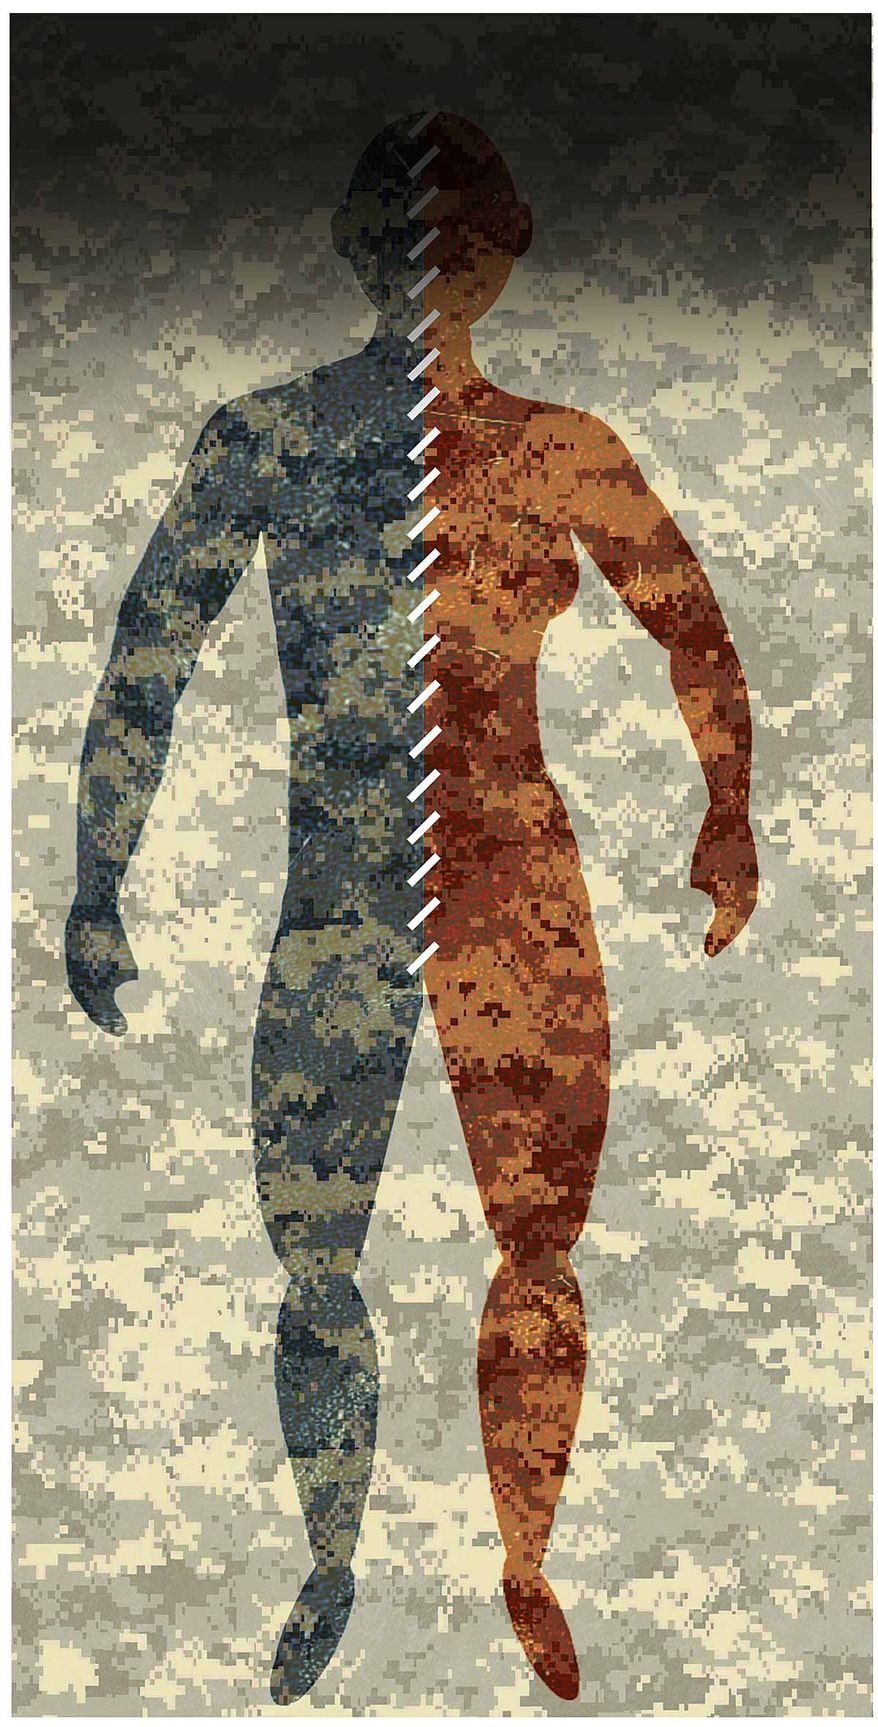 Illustration on transgender mental health in the military by Alexander Hunter/The Washington Times